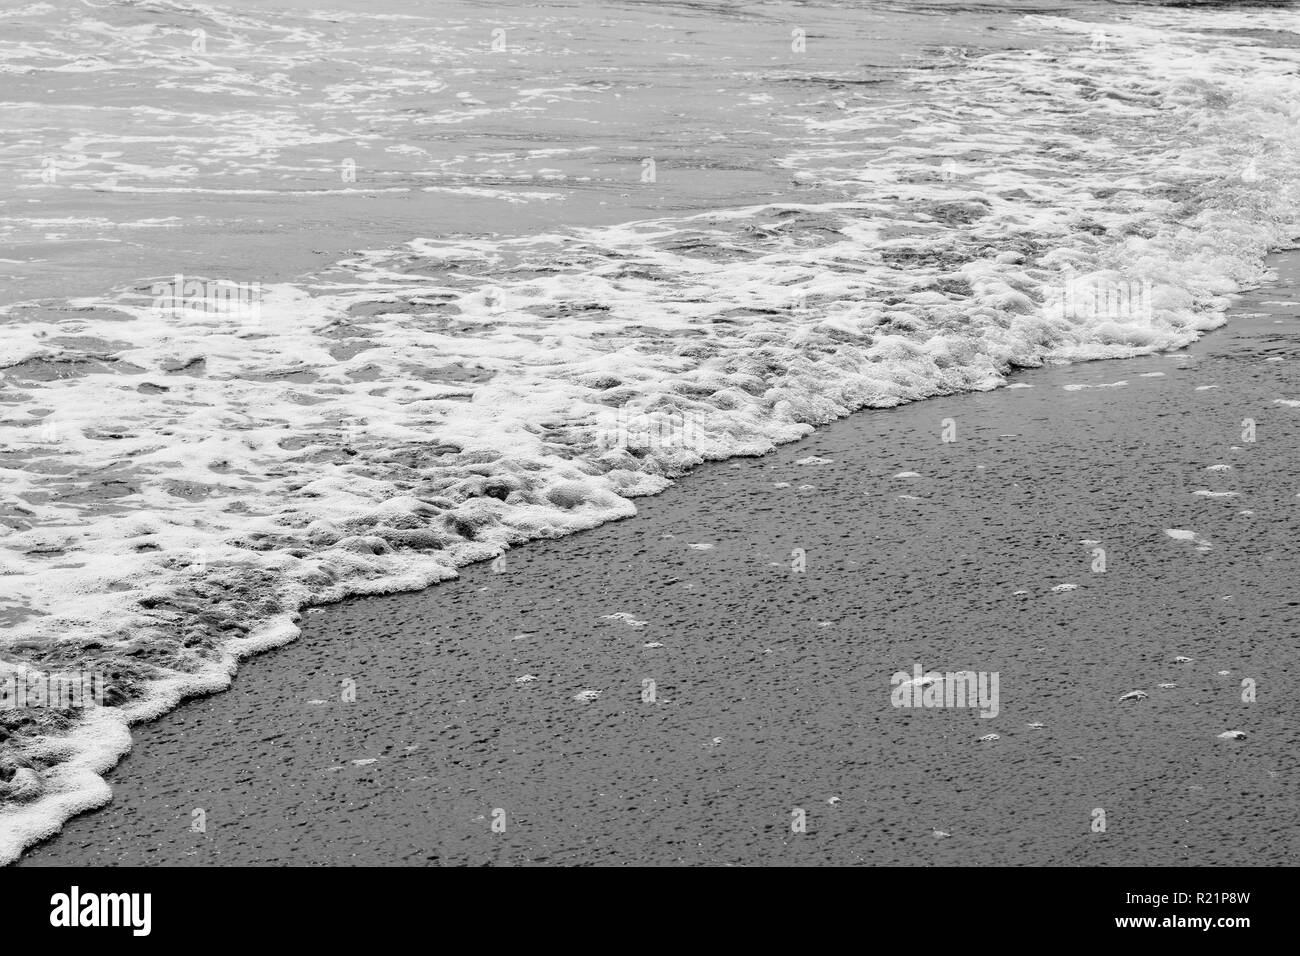 The Shore of the Pacific Ocean in black and white Stock Photo